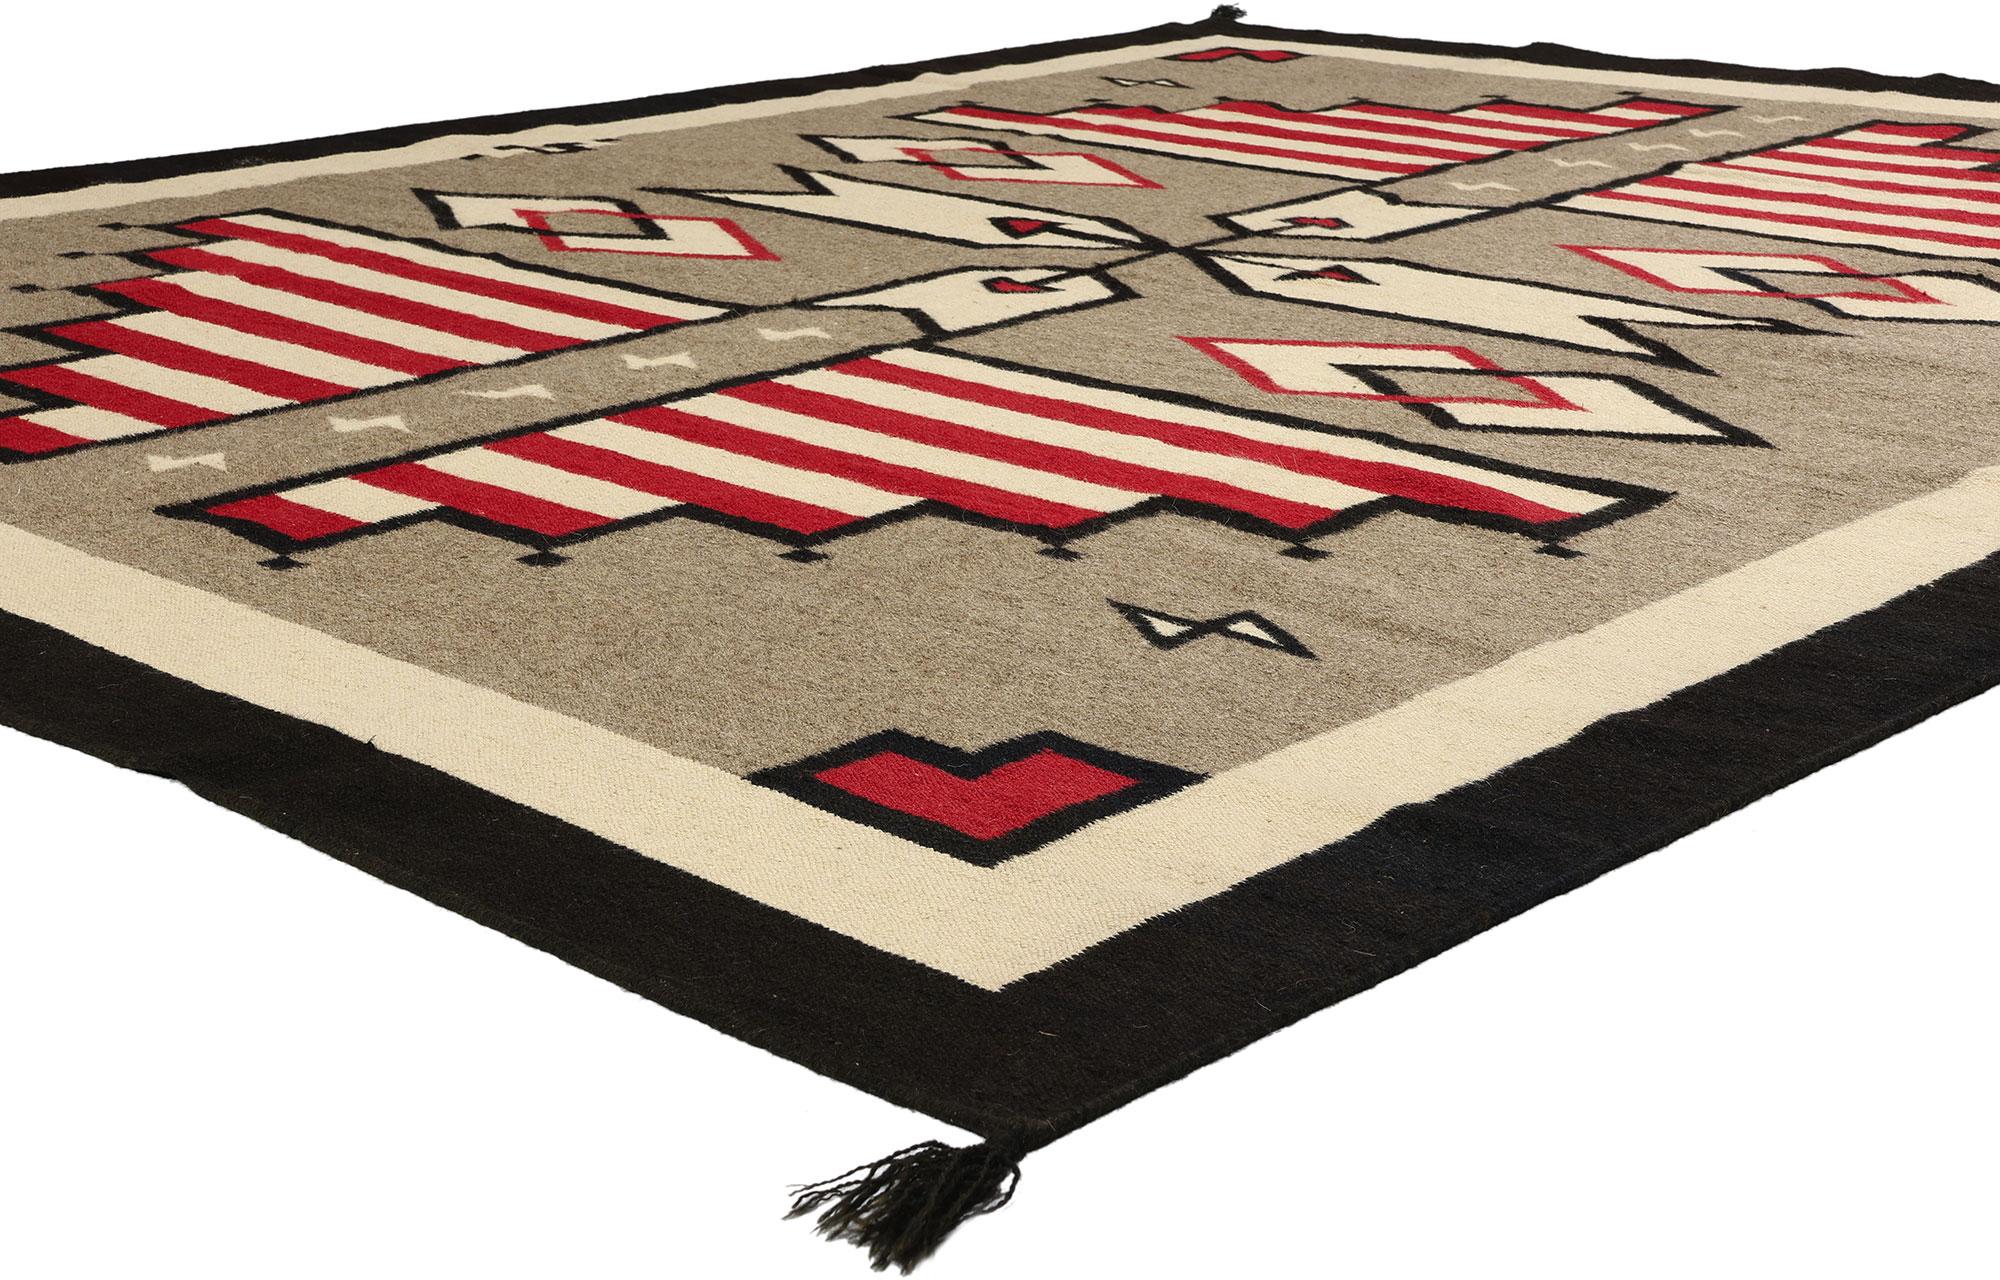 81041 Southwest Modern Navajo-Style Rug with Storm Pattern, 08'02 x 10'00. Step into the serene embrace of Native American design aesthetics, where the elegance of Contemporary Santa Fe seamlessly intertwines with the fusion of Southwestern and